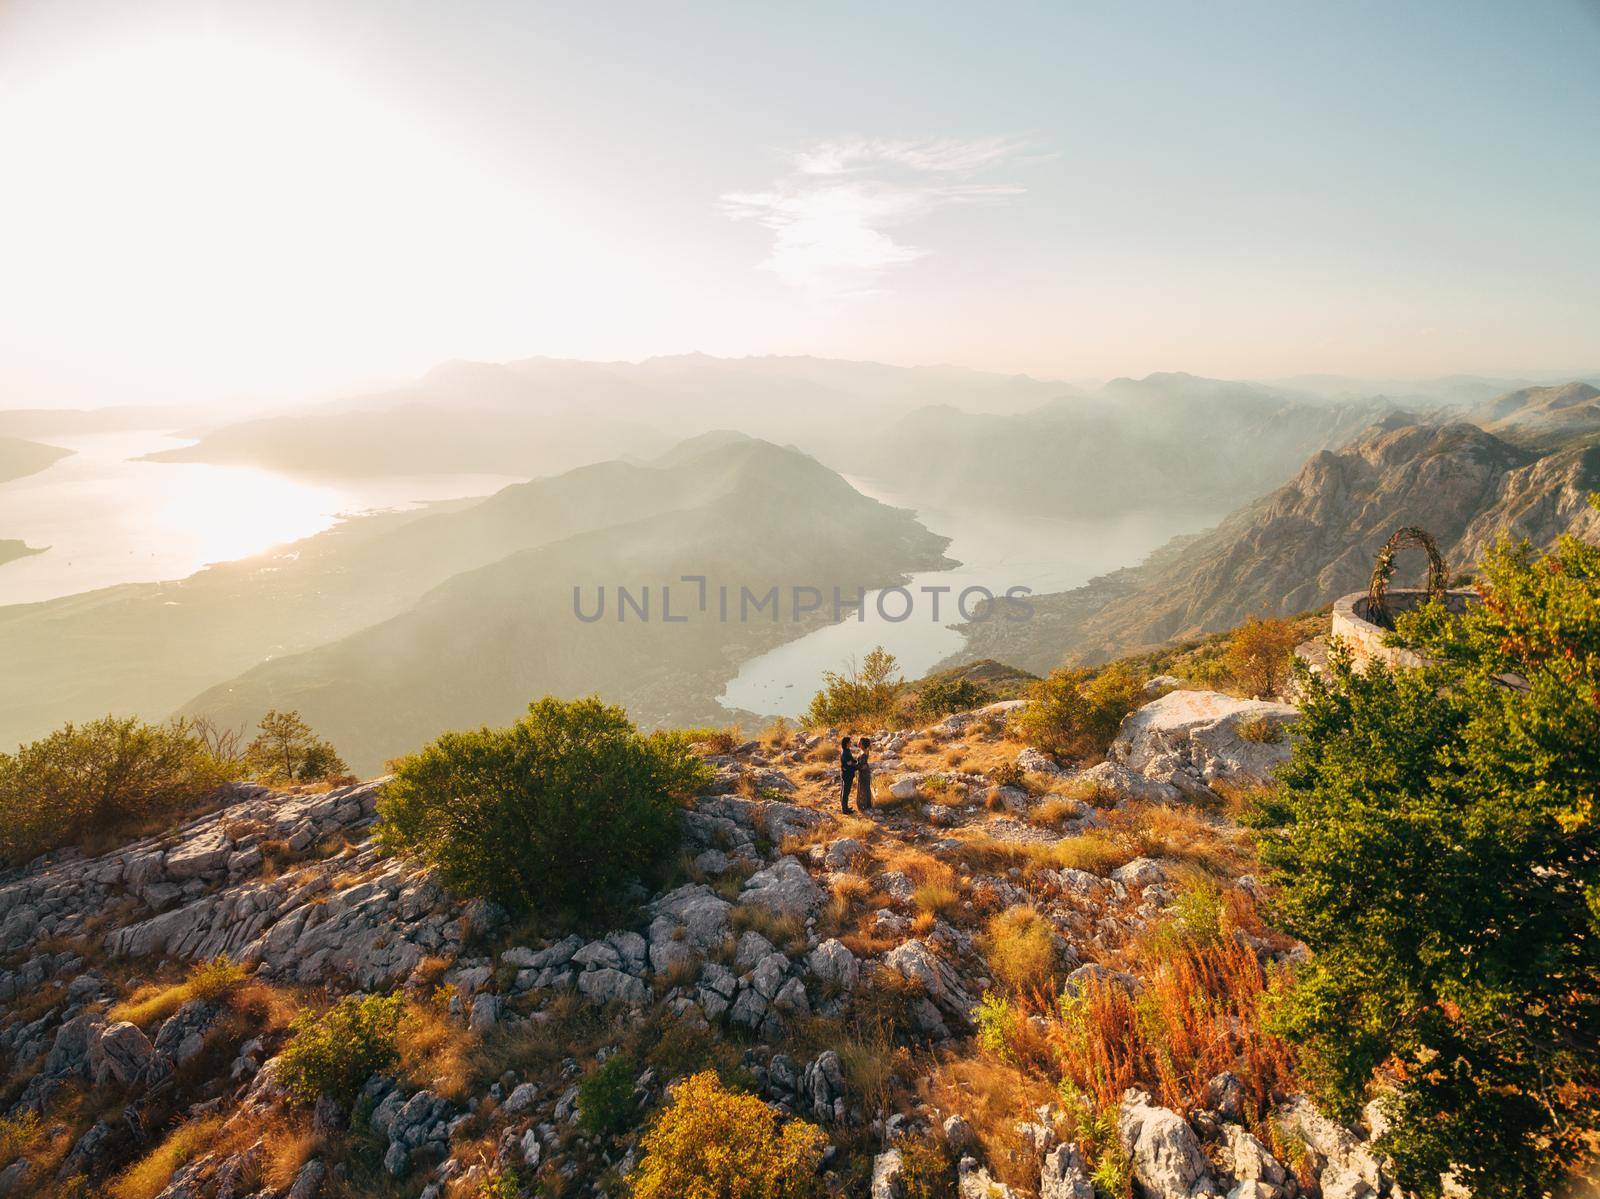 The bride and groom embracing on the Lovcen mountain behind them opens a view of the Bay of Kotor by Nadtochiy